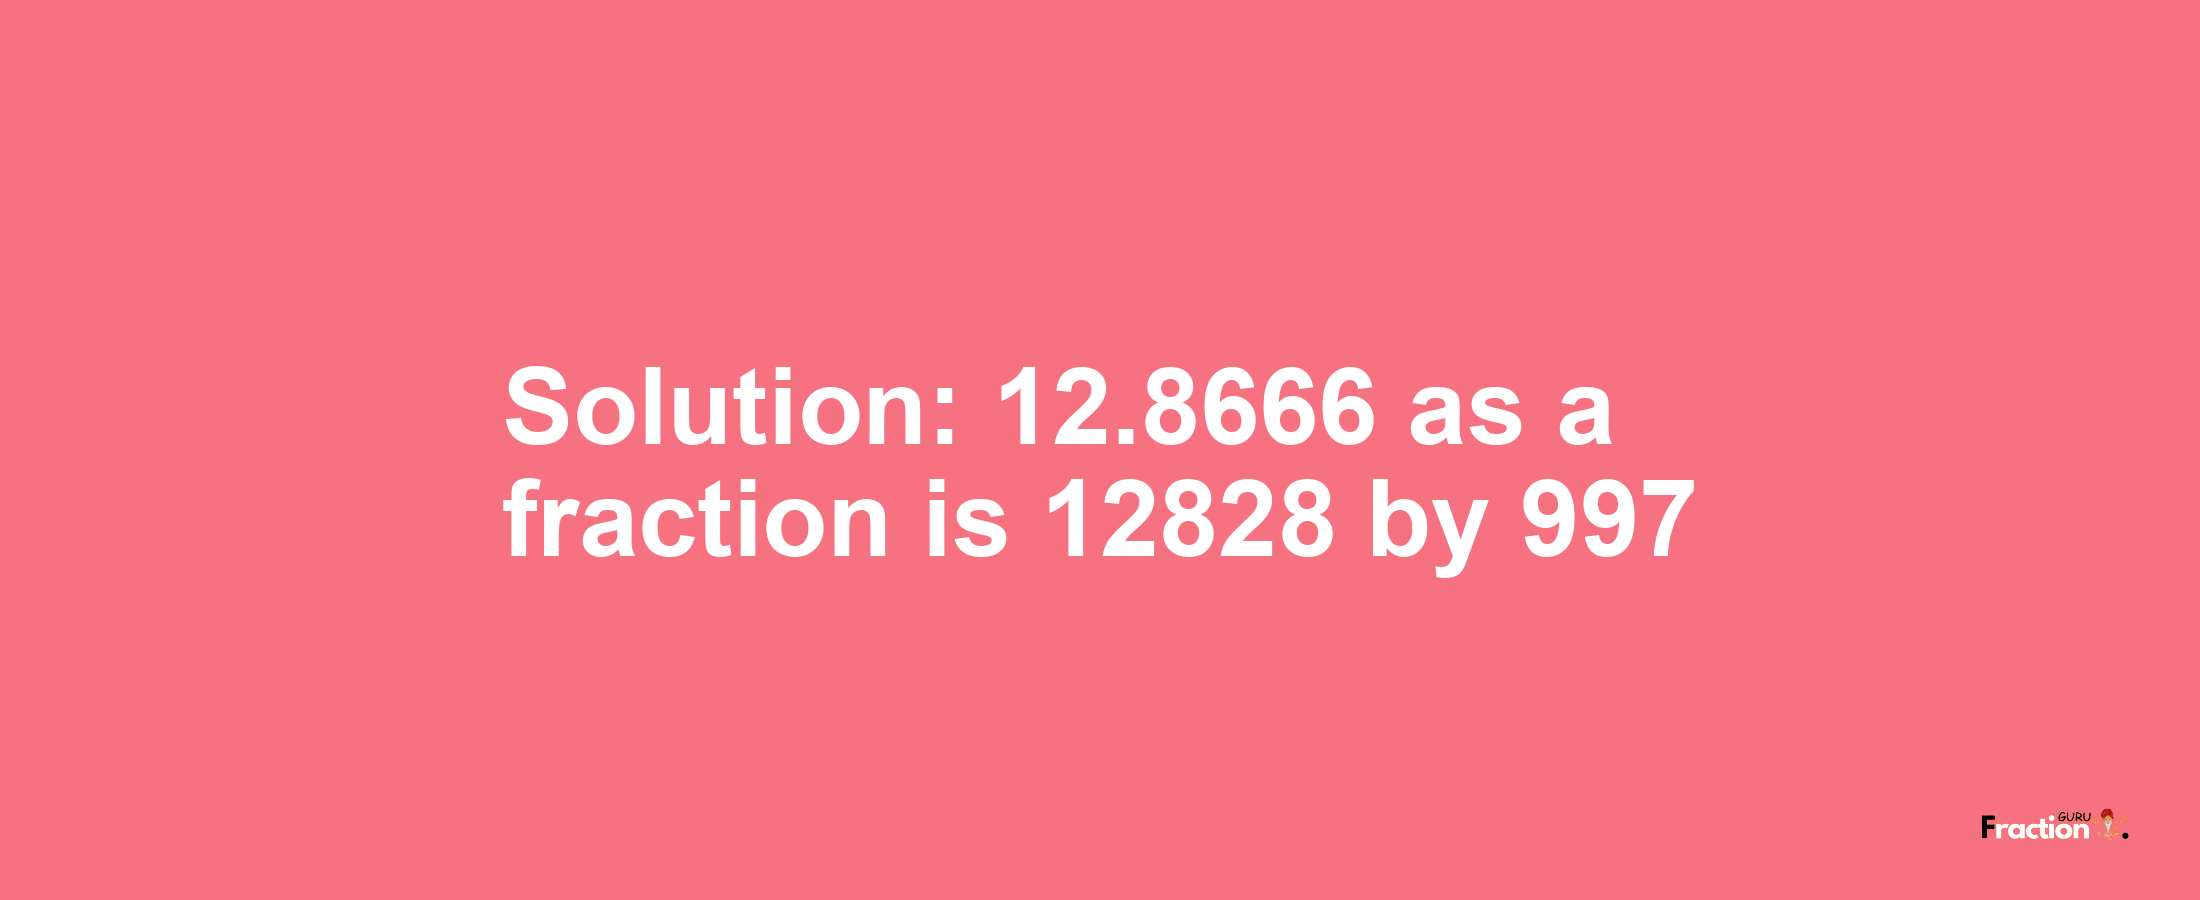 Solution:12.8666 as a fraction is 12828/997